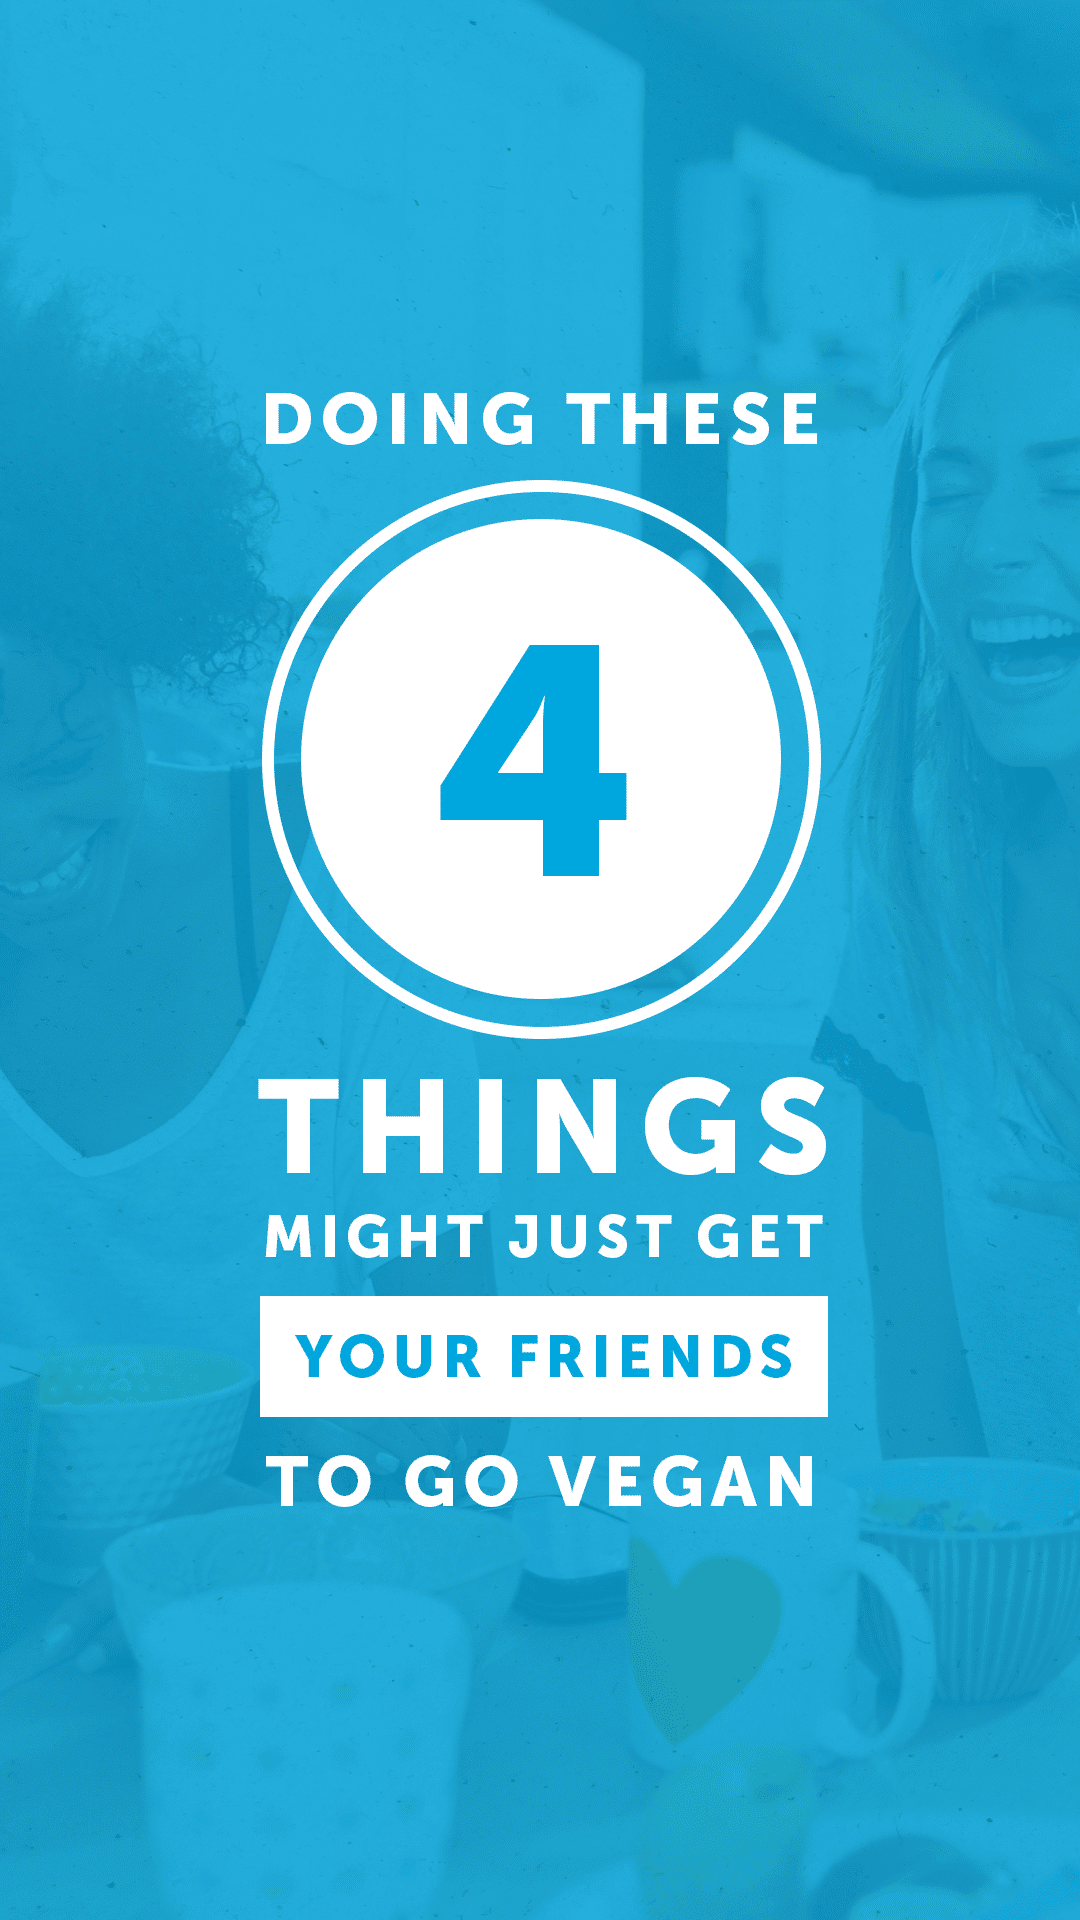 Doing These 4 Things Might Just Get Your Friends to Go Vegan